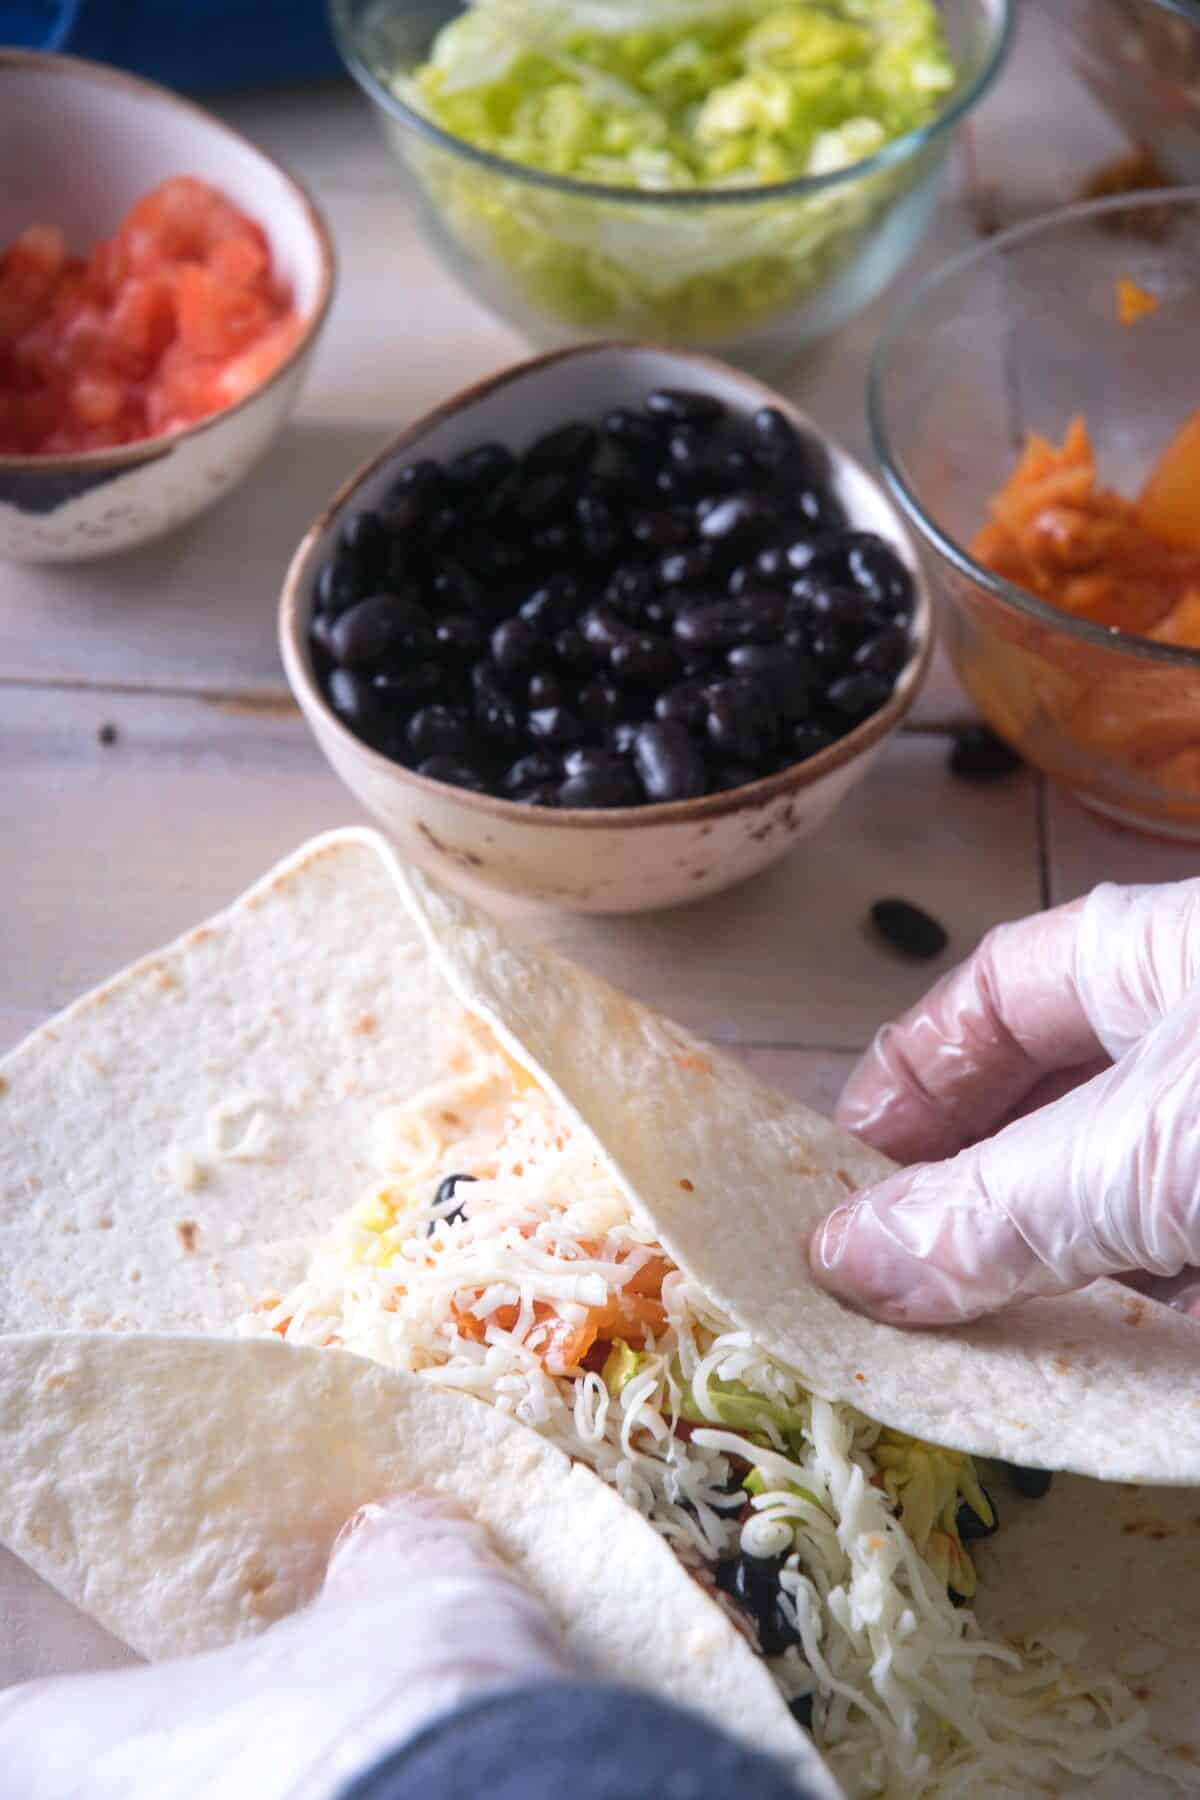 Tortilla with burrito ingredients.